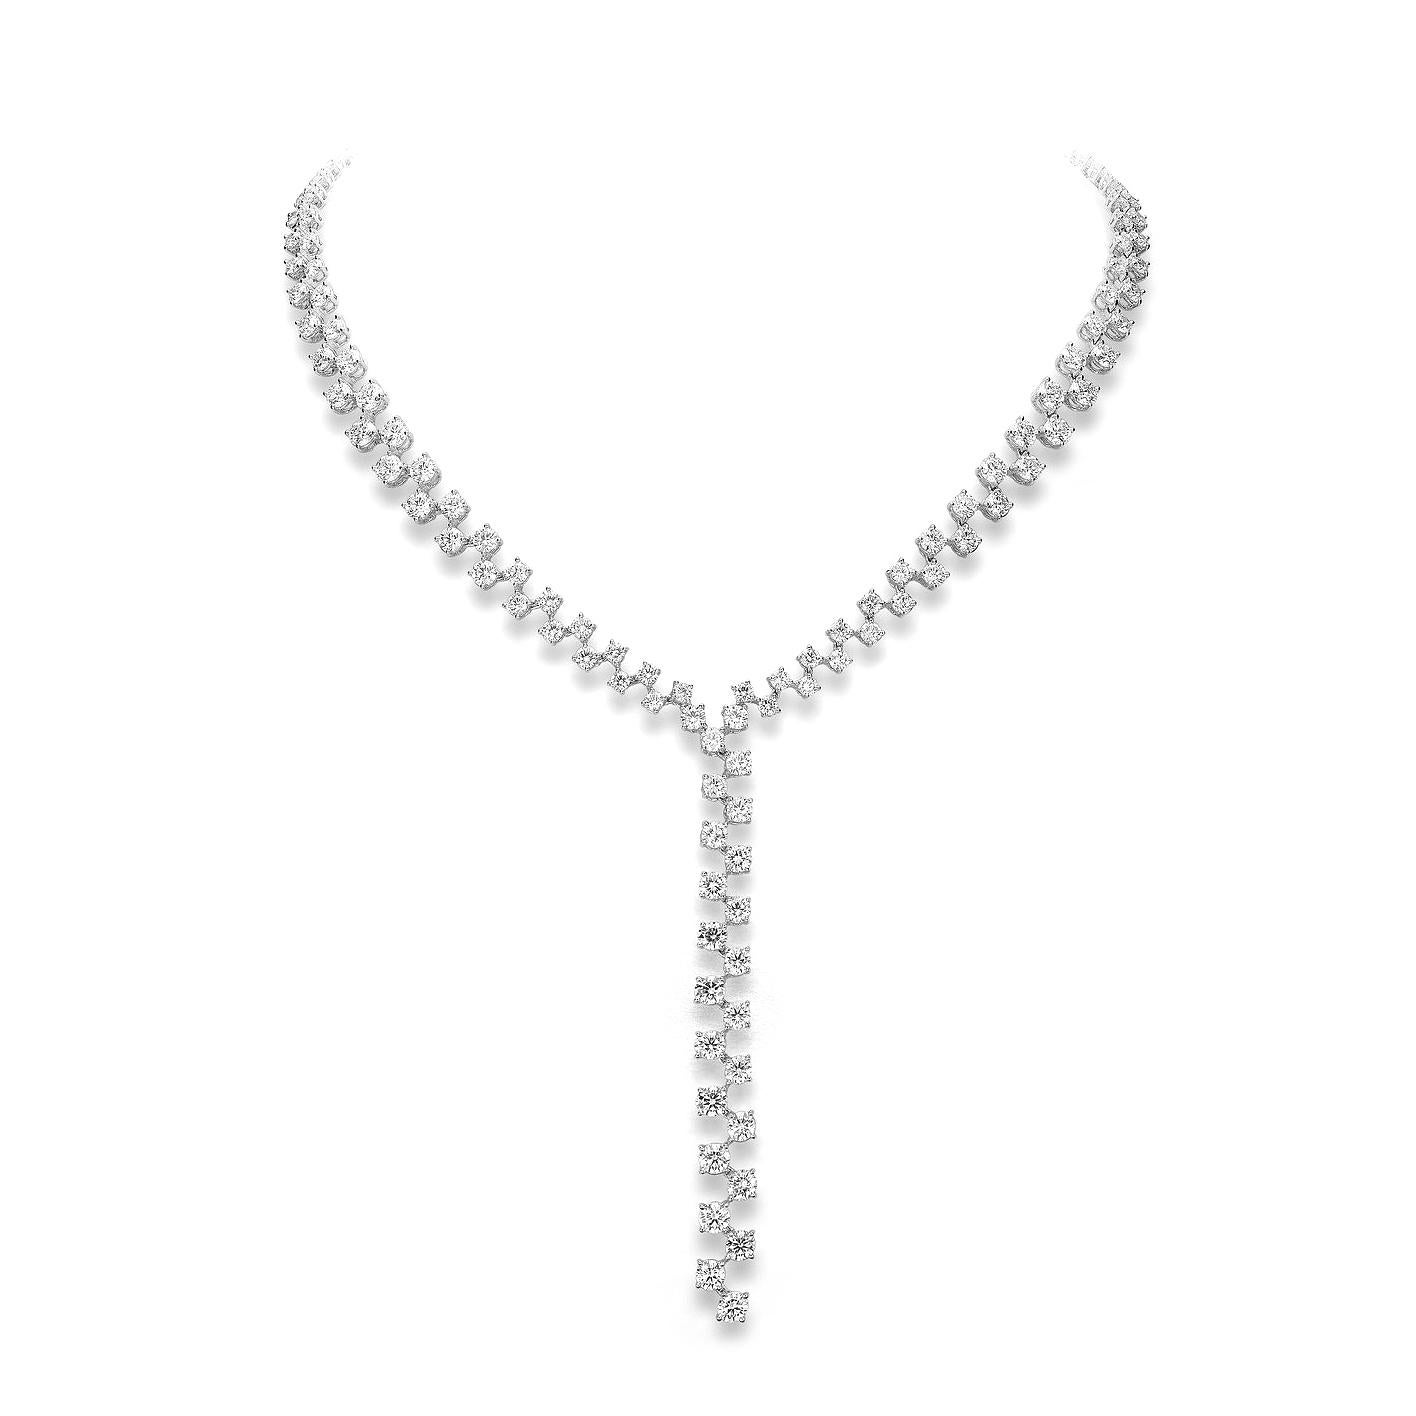 Necklace in 18kt white gold set with 160 diamonds 23.49 cts  G VS1